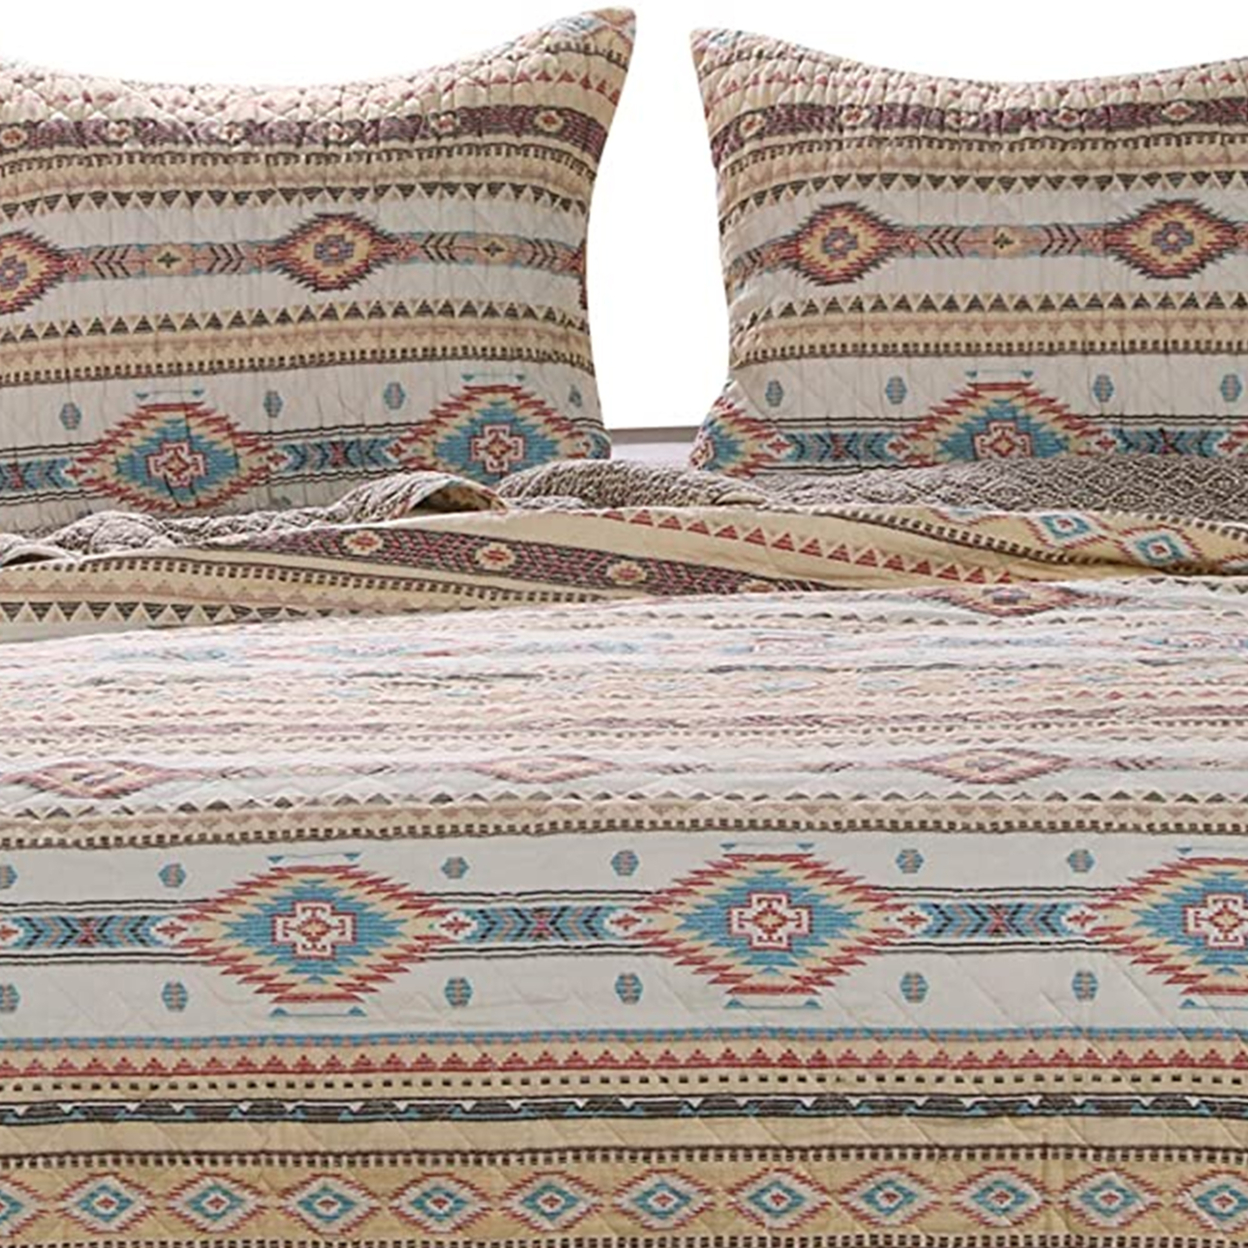 King Size 3 Piece Polyester Quilt Set With Kilim Pattern, Multicolor- Saltoro Sherpi